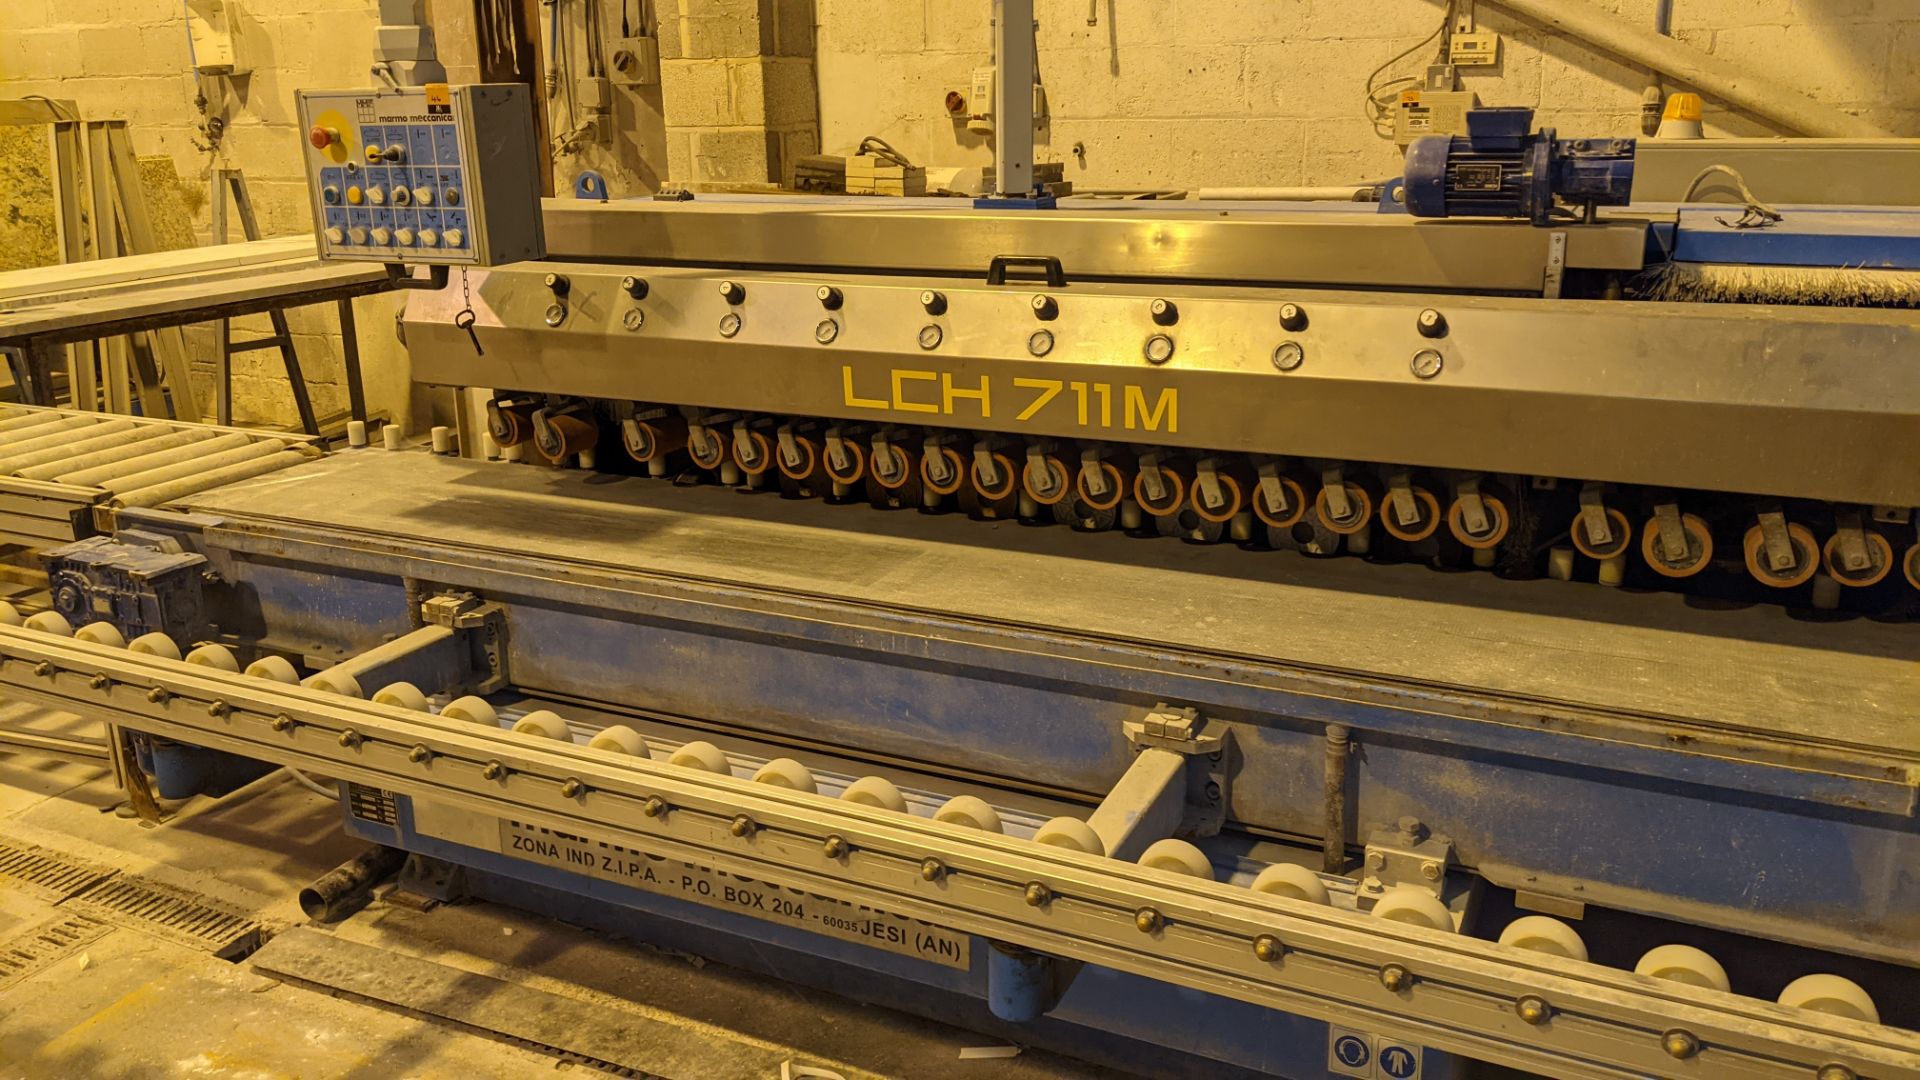 2005 Marmo Meccanica model LCH711M/SE 7-head edge polisher, serial no. 6880. This lot includes the 2 - Image 10 of 25